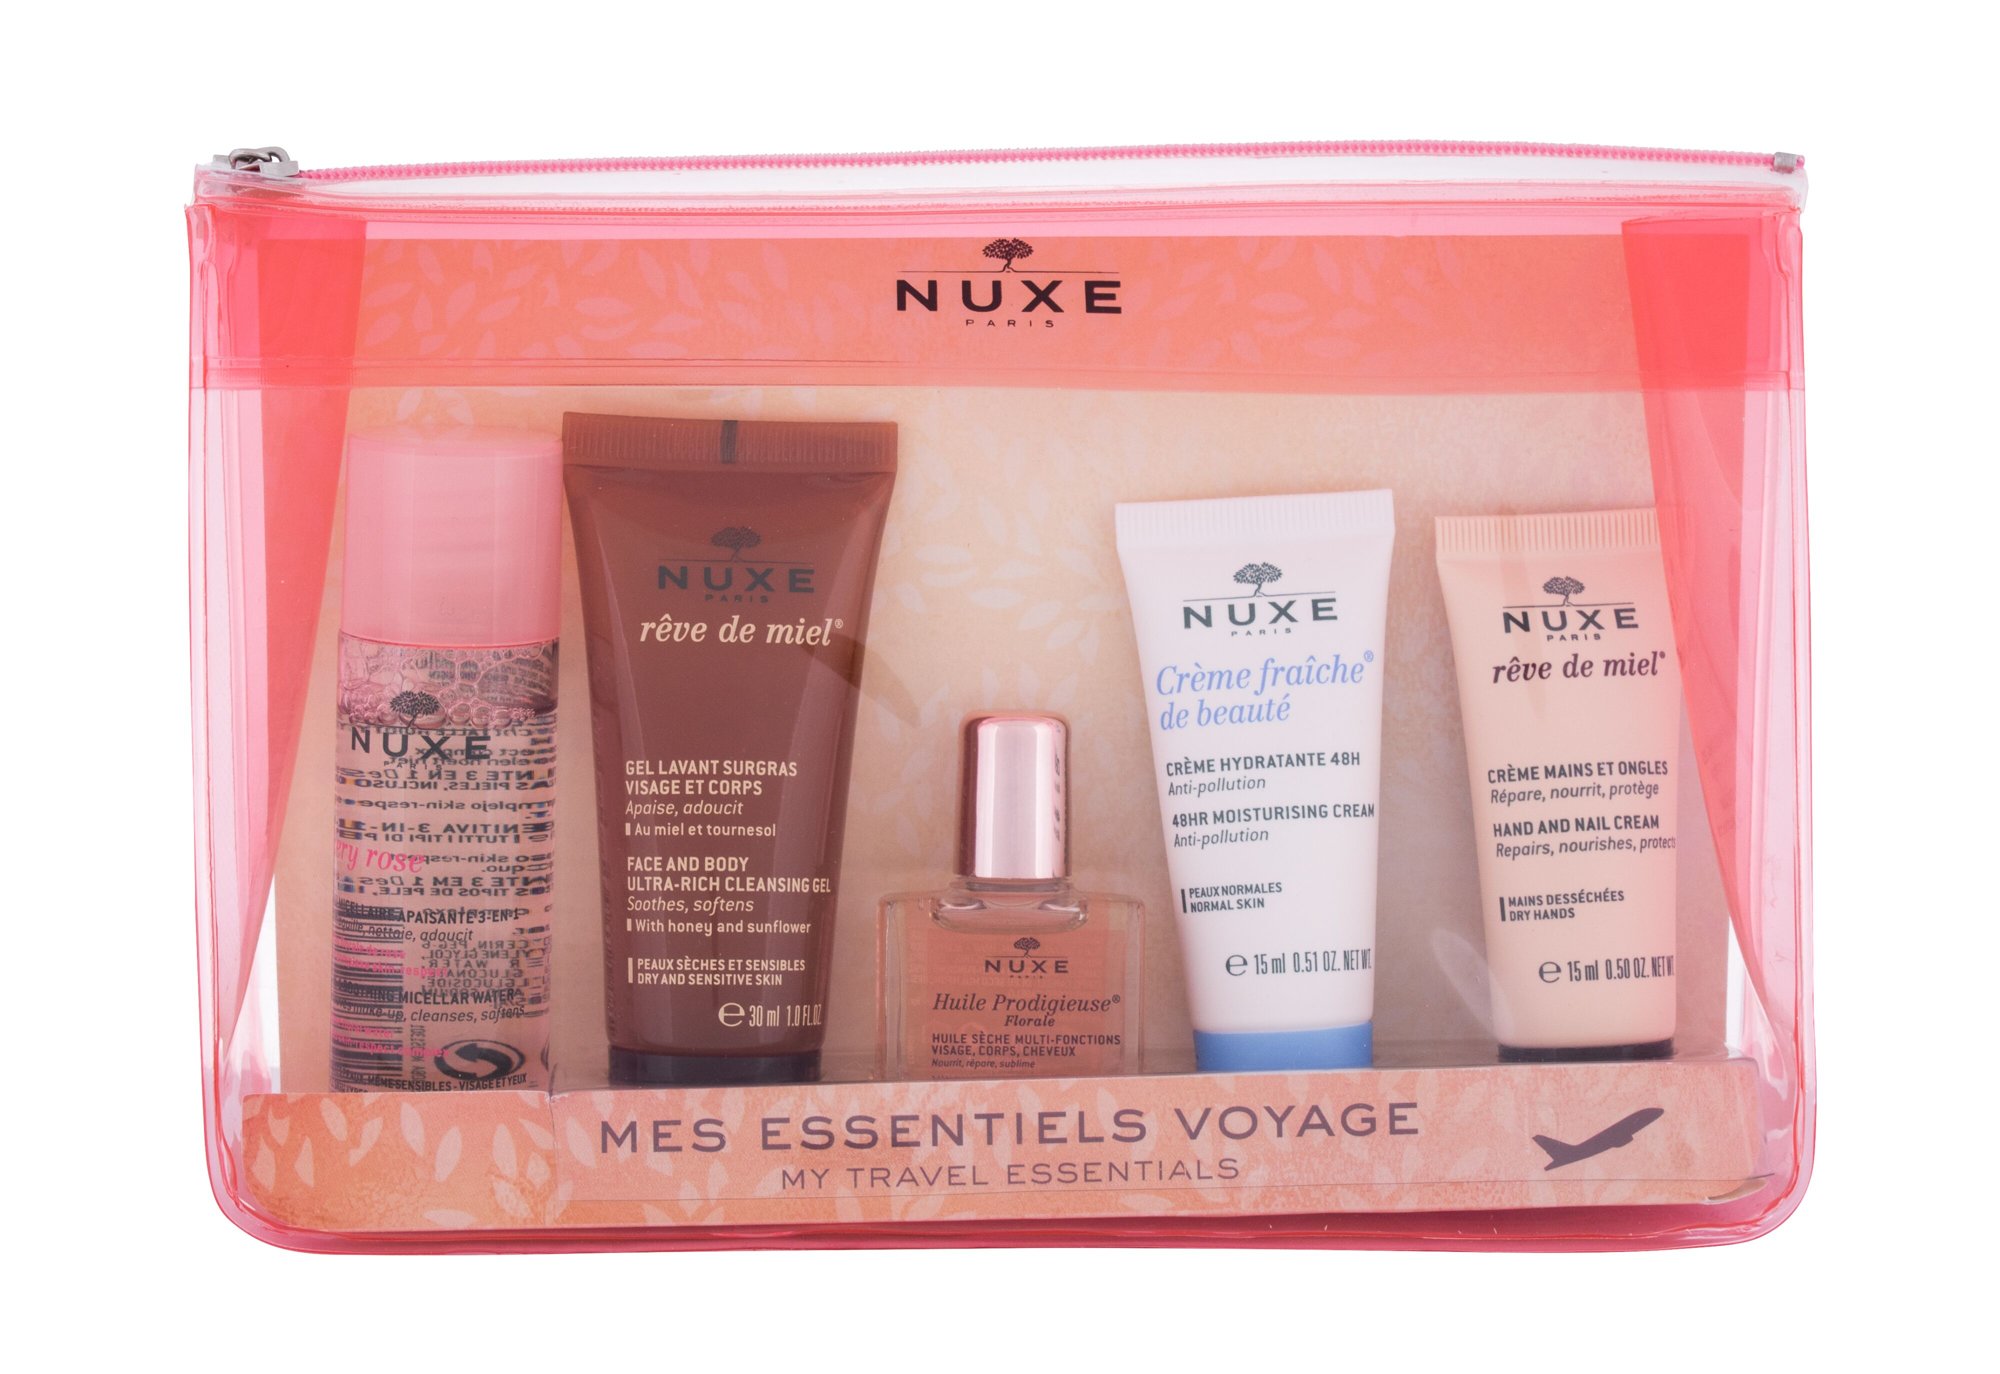 Nuxe My Travel Essentials 10ml Dry Oil Huile Prodigieuse Florale 10 ml + Micellar Water Very Rose Soothing 3-in-1 40 ml + Reve de Miel Face and Body Ultra-Rich 30 ml + Créme Fraiche 48HR Moisturizing Cream 15 ml + Reve de Miel Hand and Nail Cream 15 ml + Cosmetic Bag kūno aliejus Rinkinys